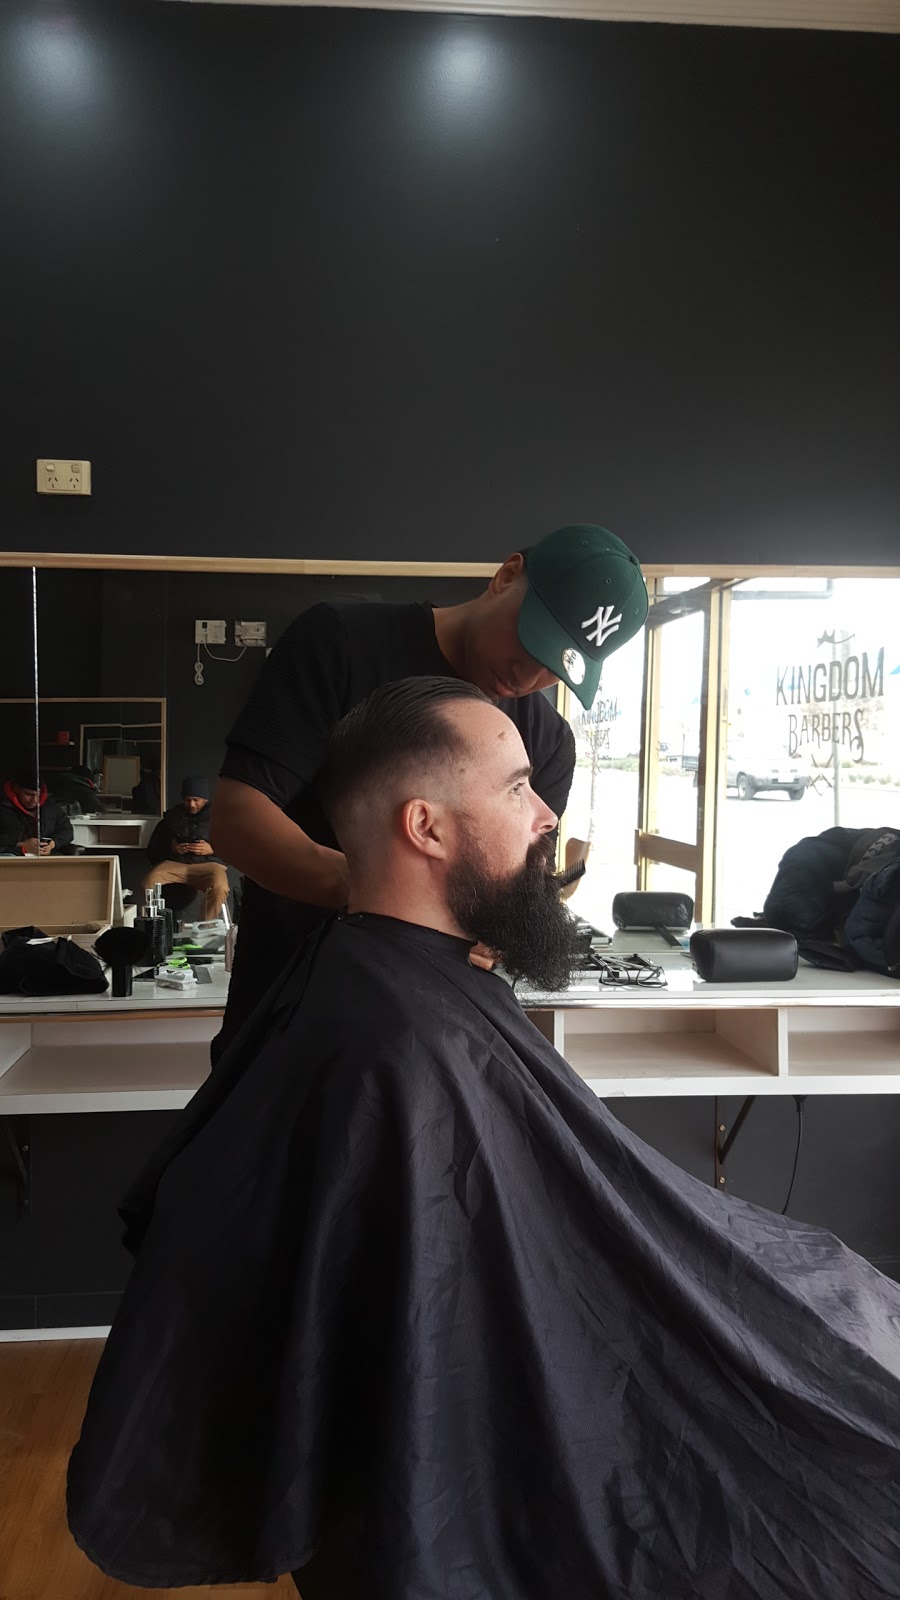 Kingdom Barbers Melbourne | hair care | 169 Sunshine Rd, West Footscray VIC 3012, Australia | 0481138941 OR +61 481 138 941